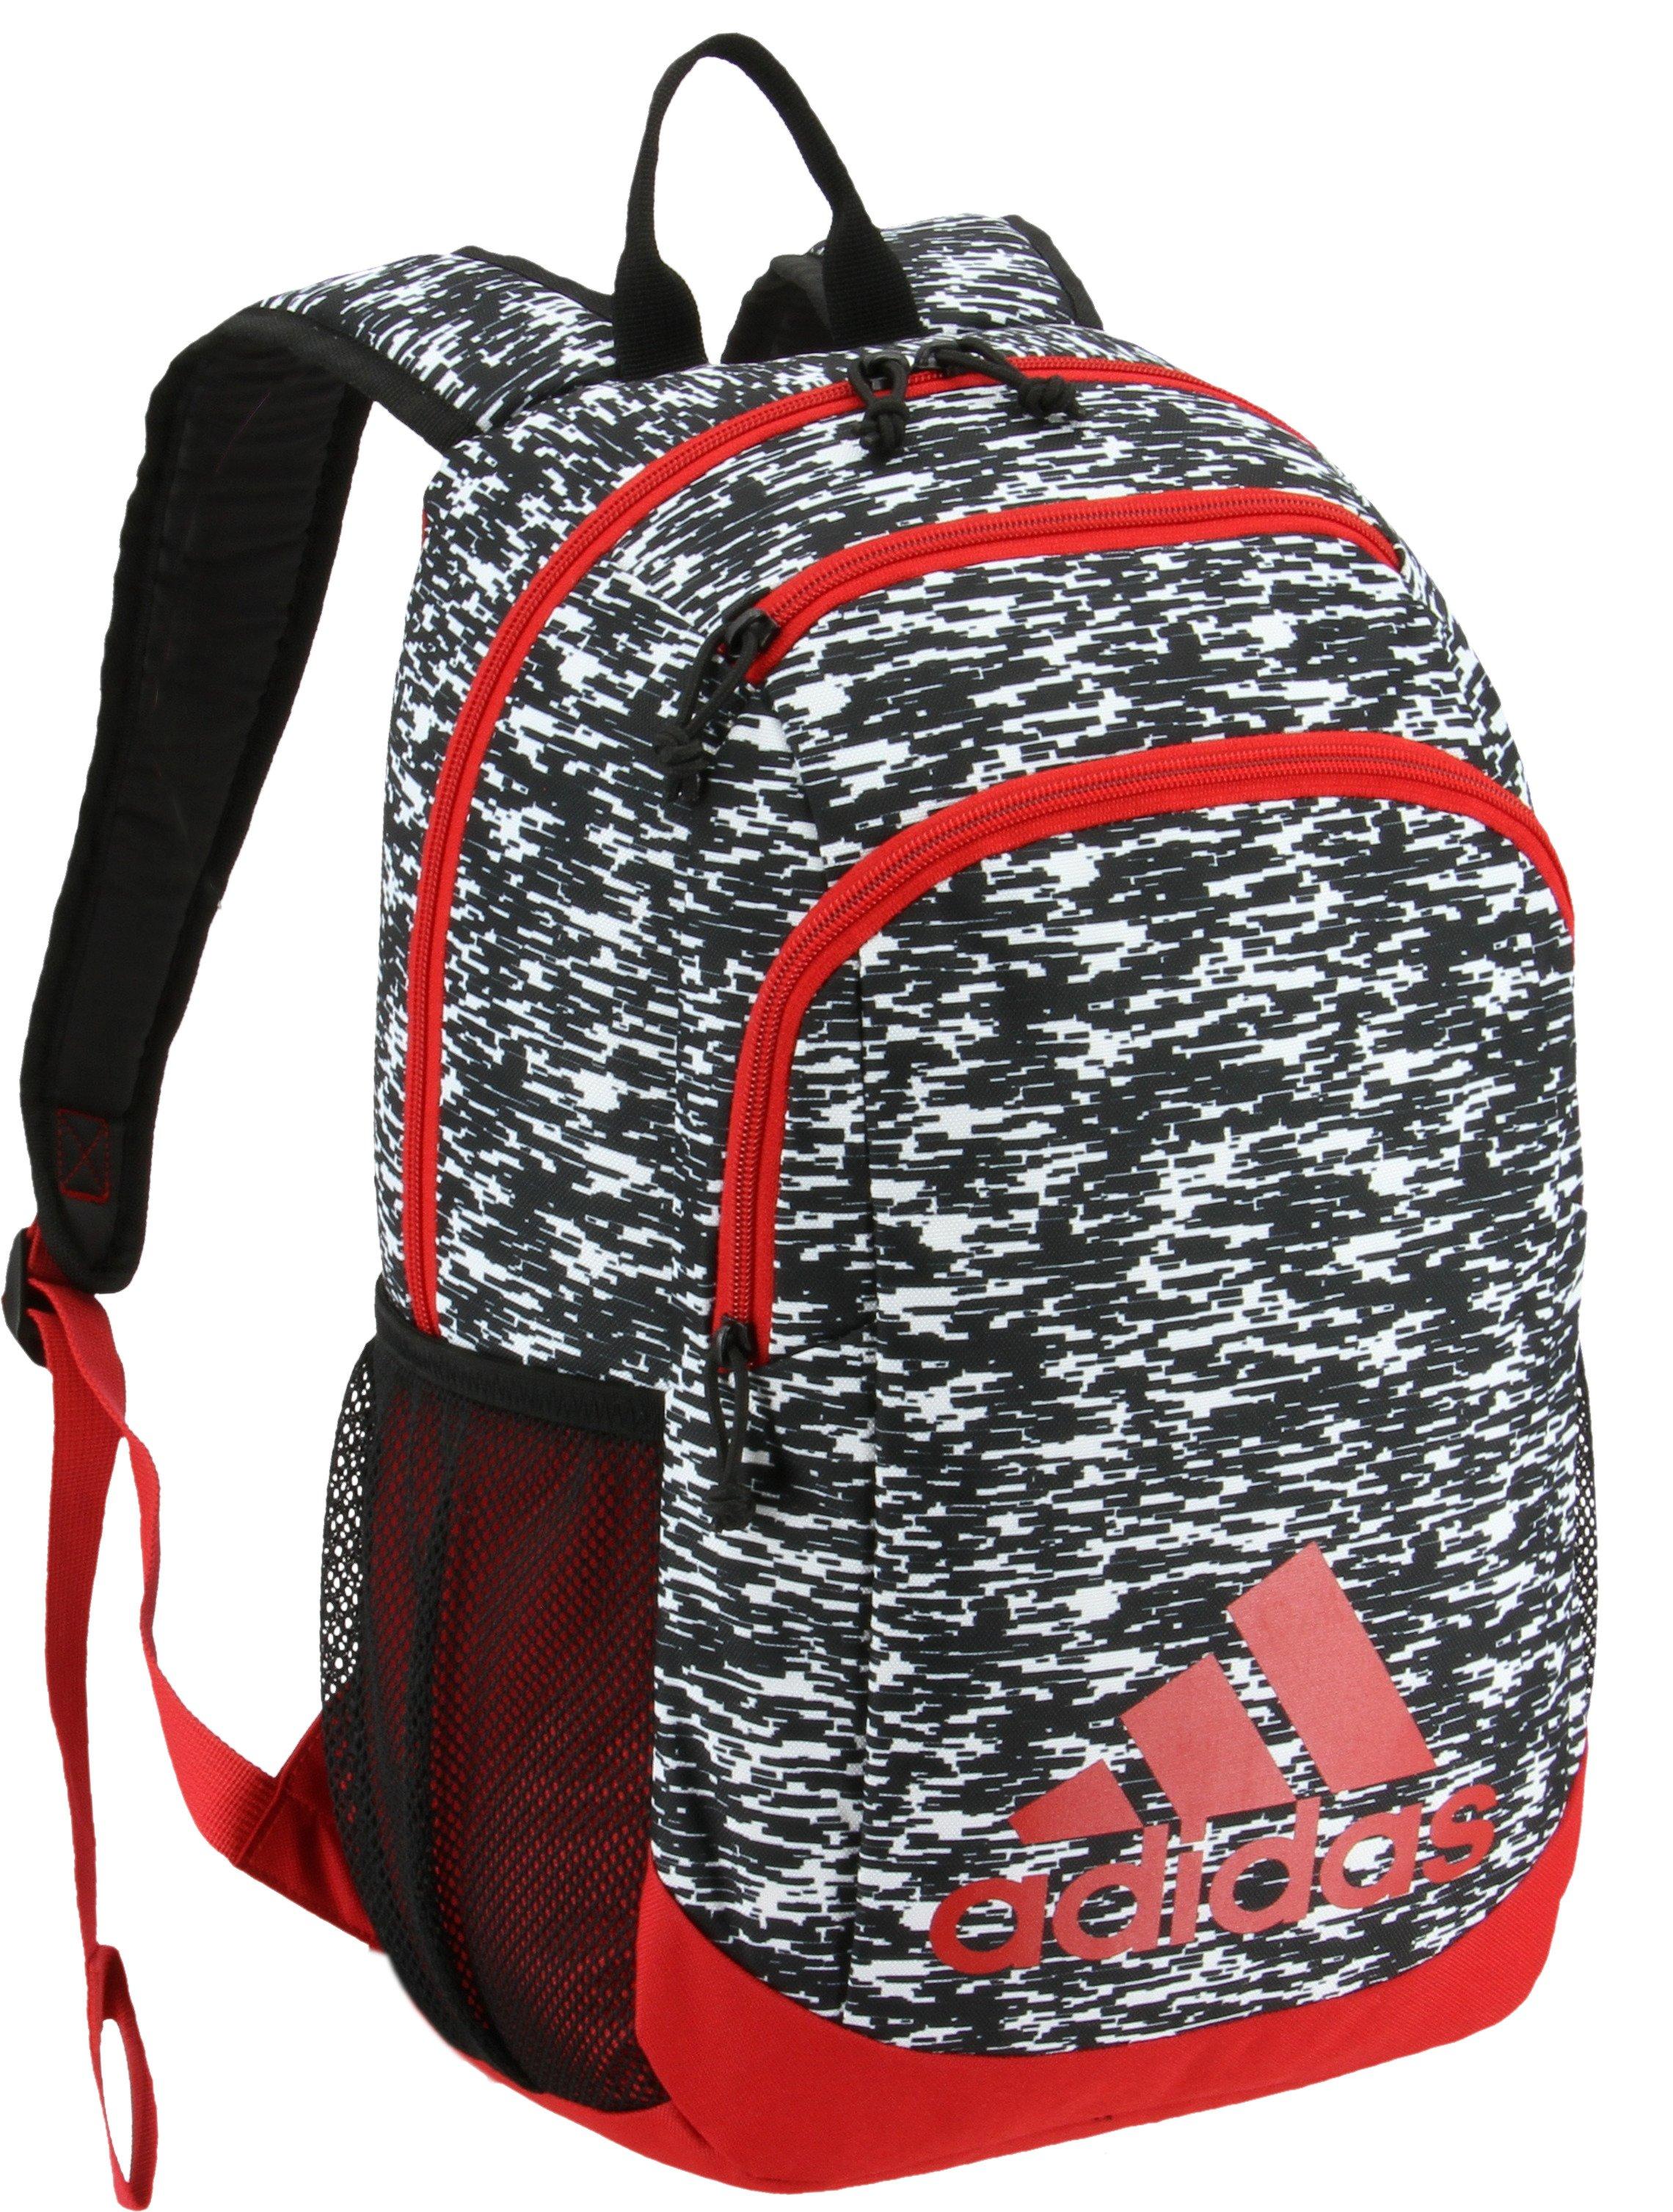 adidas youth young creator backpack